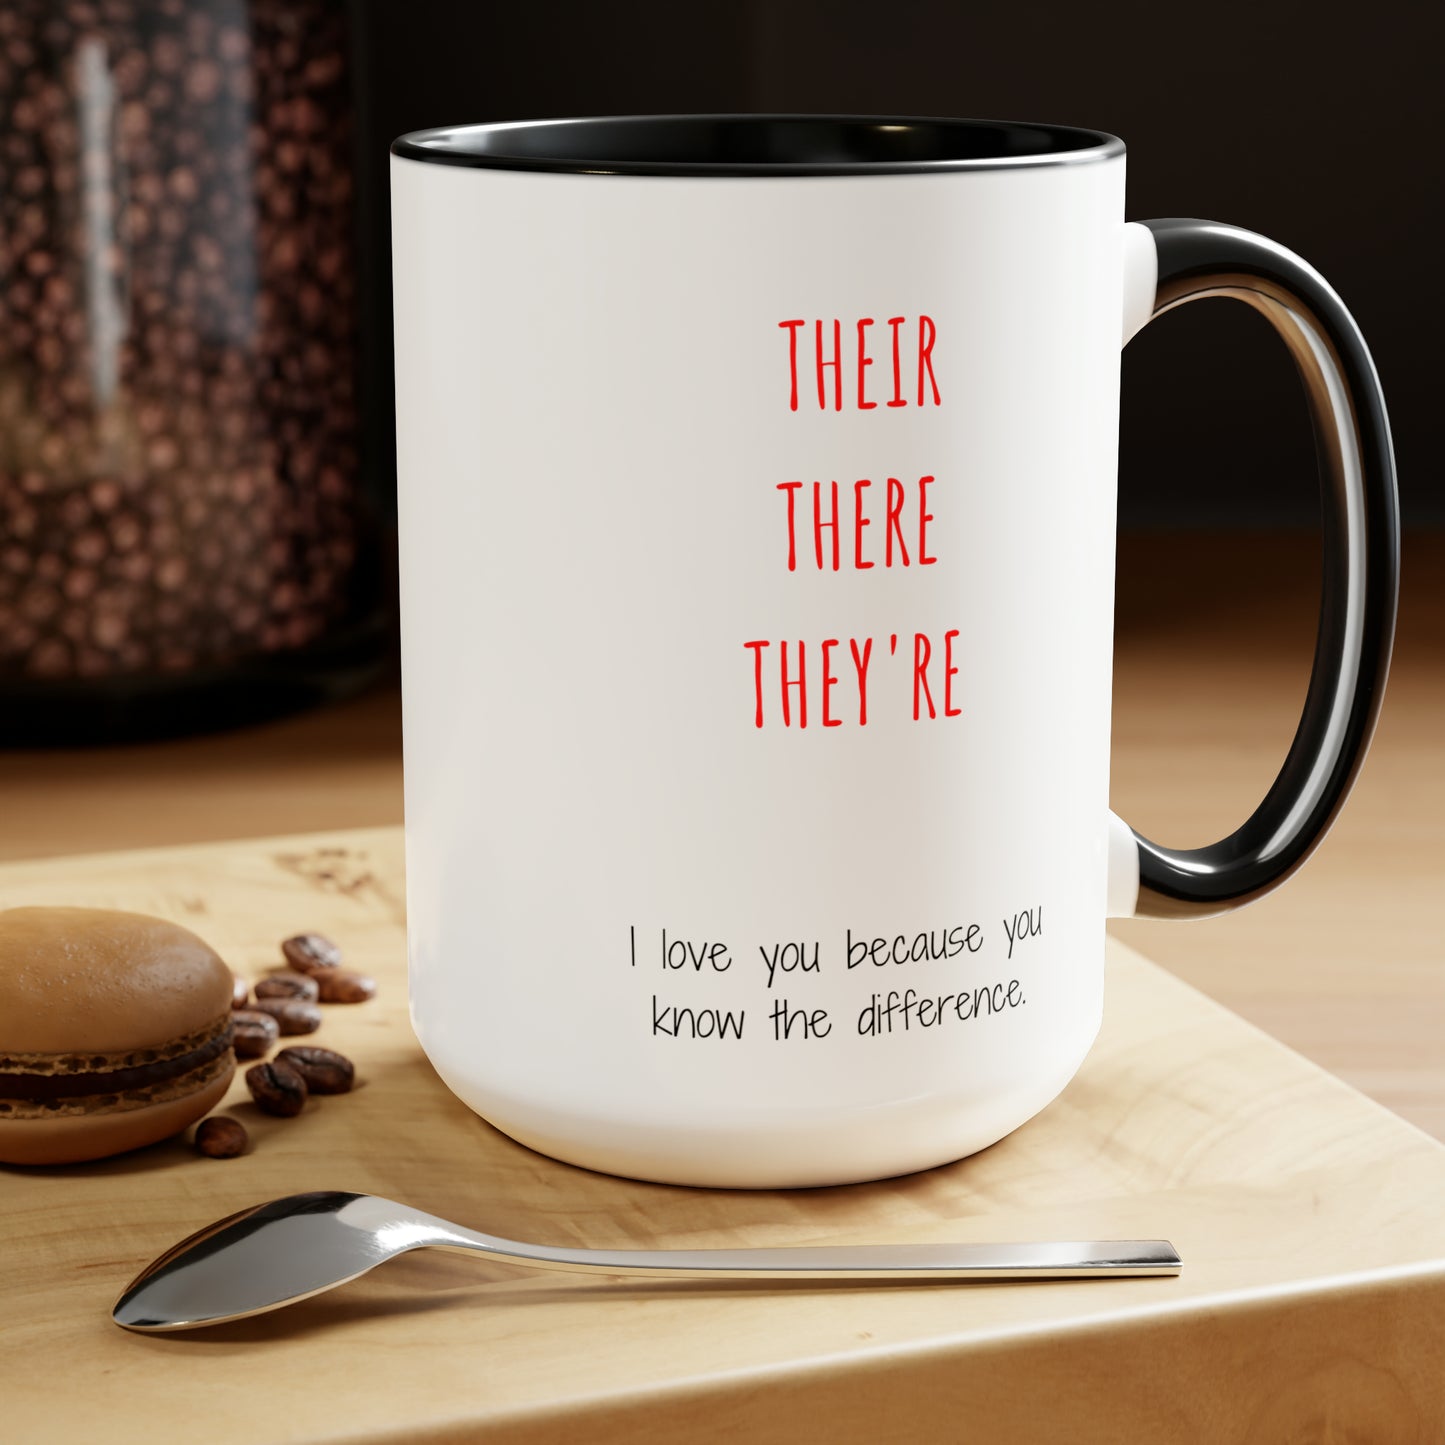 Their There They're Love You Mug 15 oz